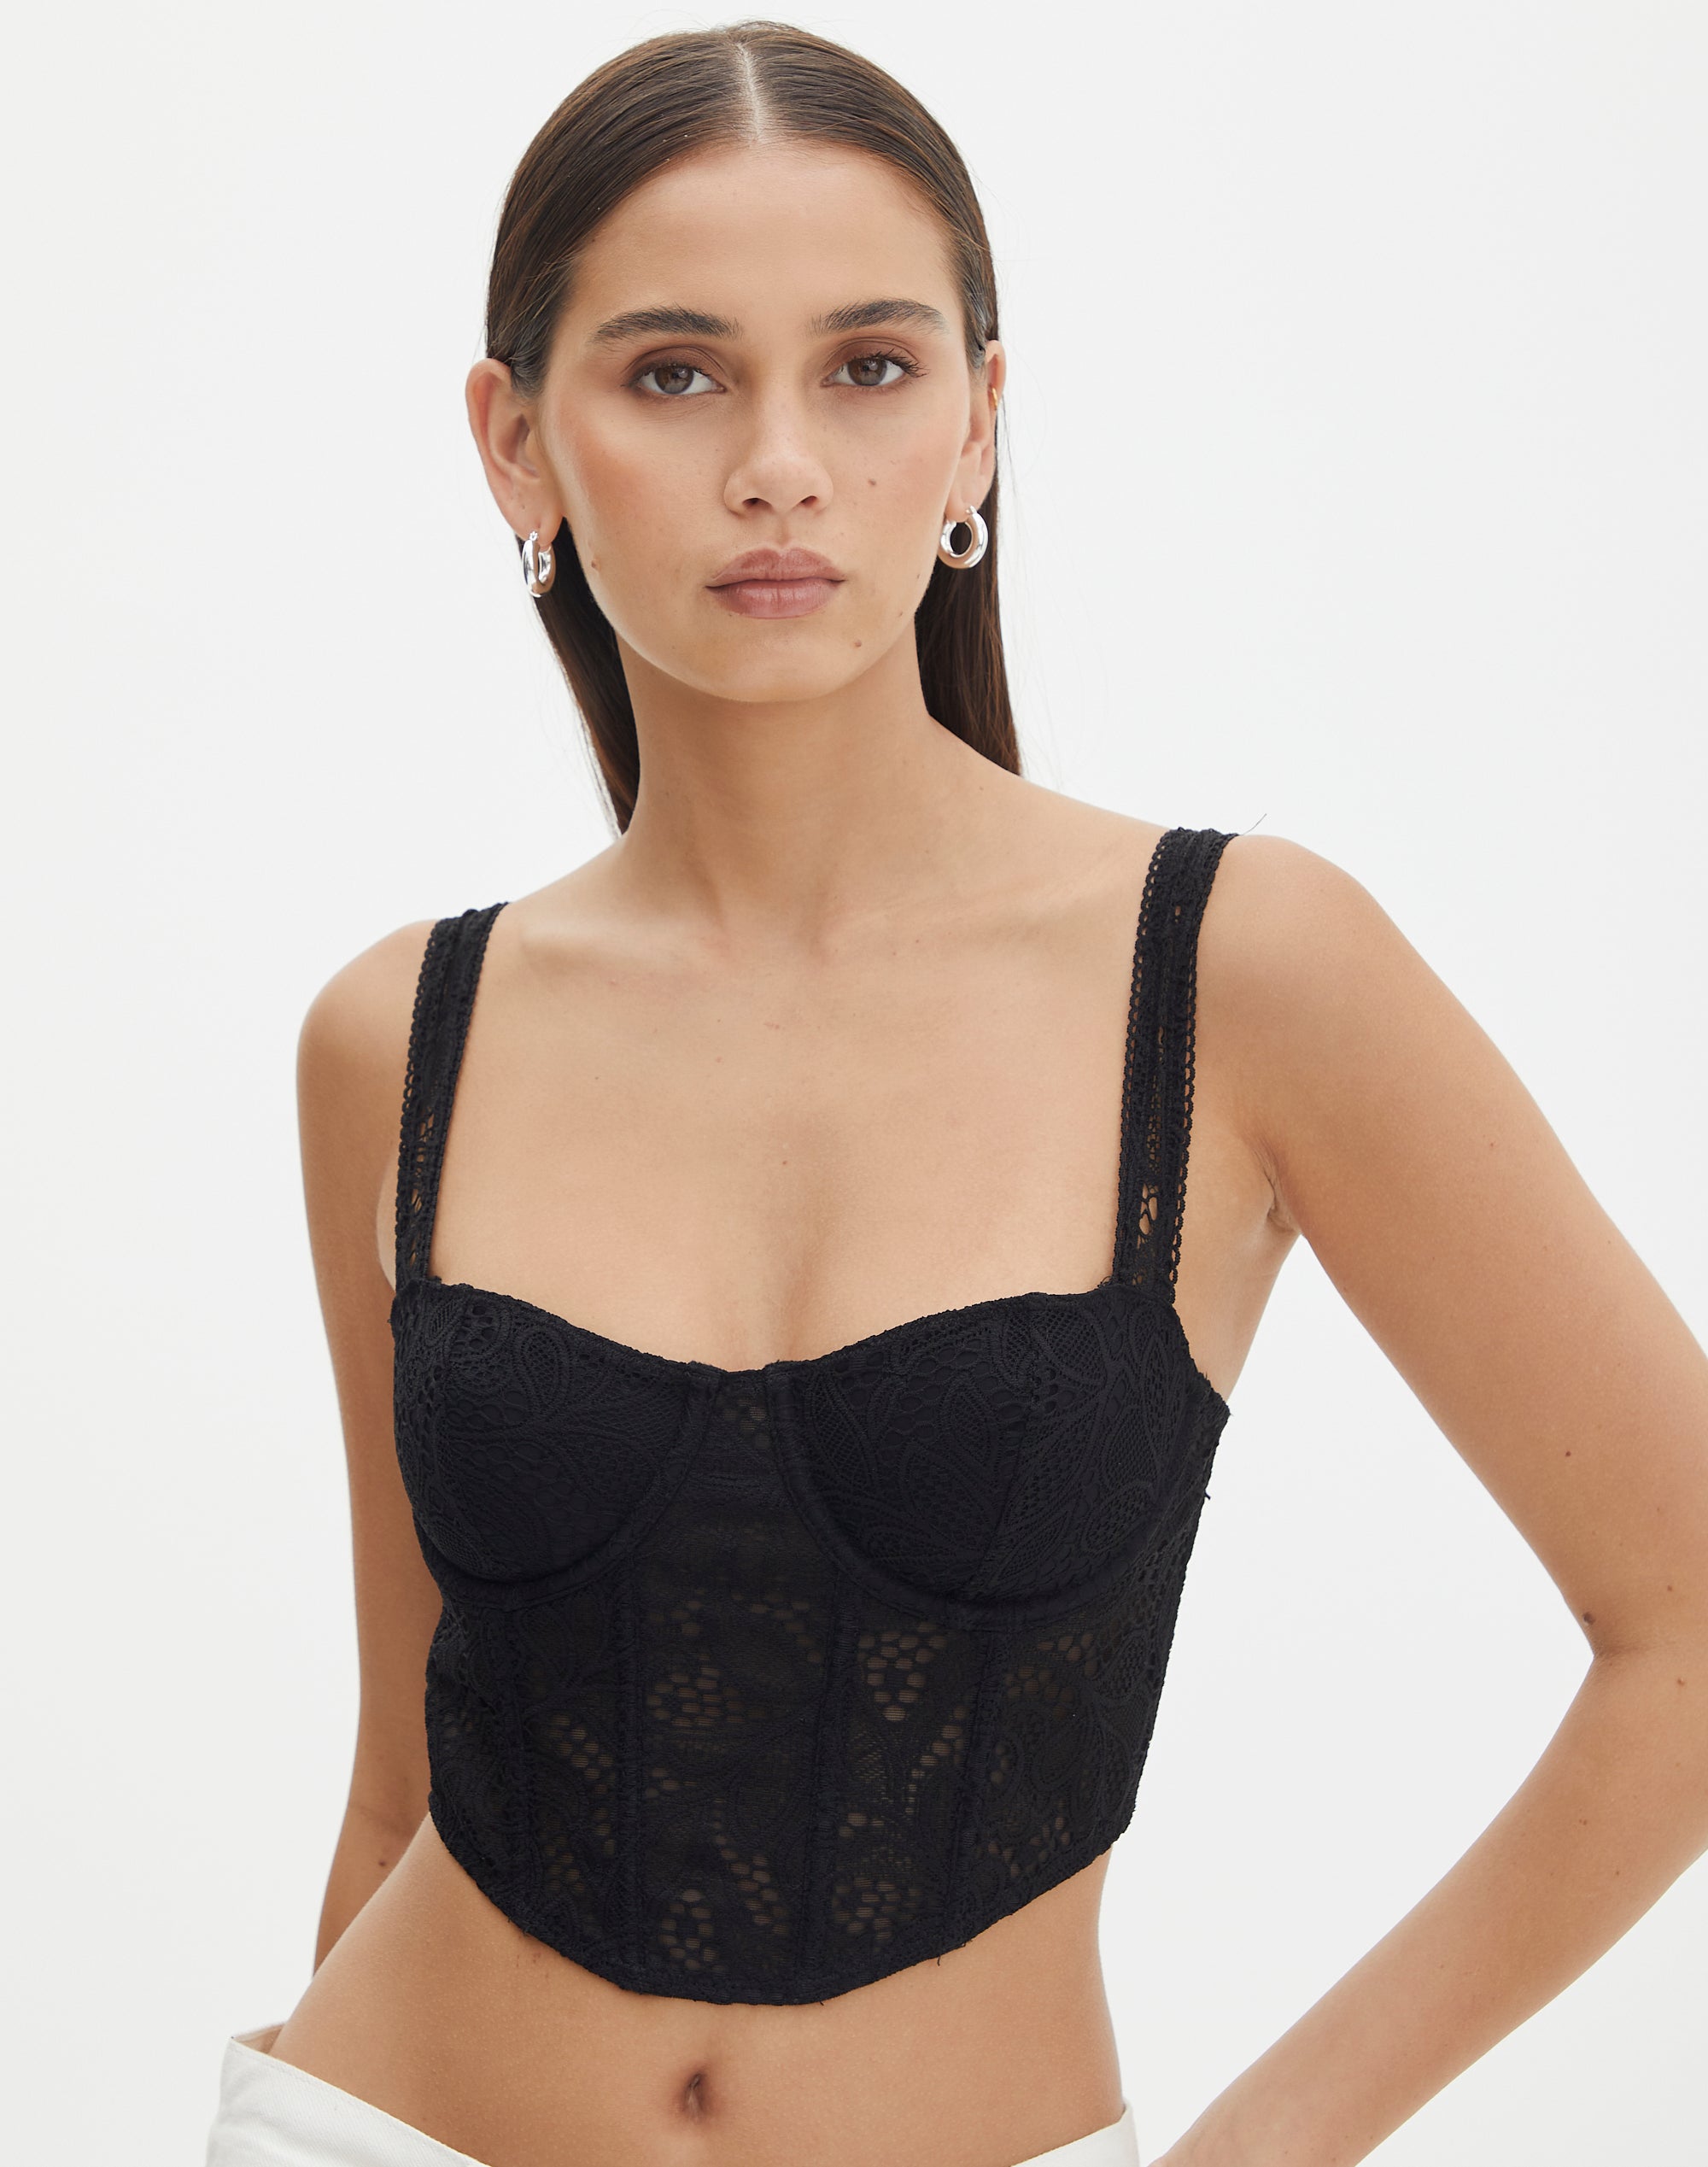 https://www.glassons.com/content/products/piper-picot-bralette-black-front-ut96900lac.jpg